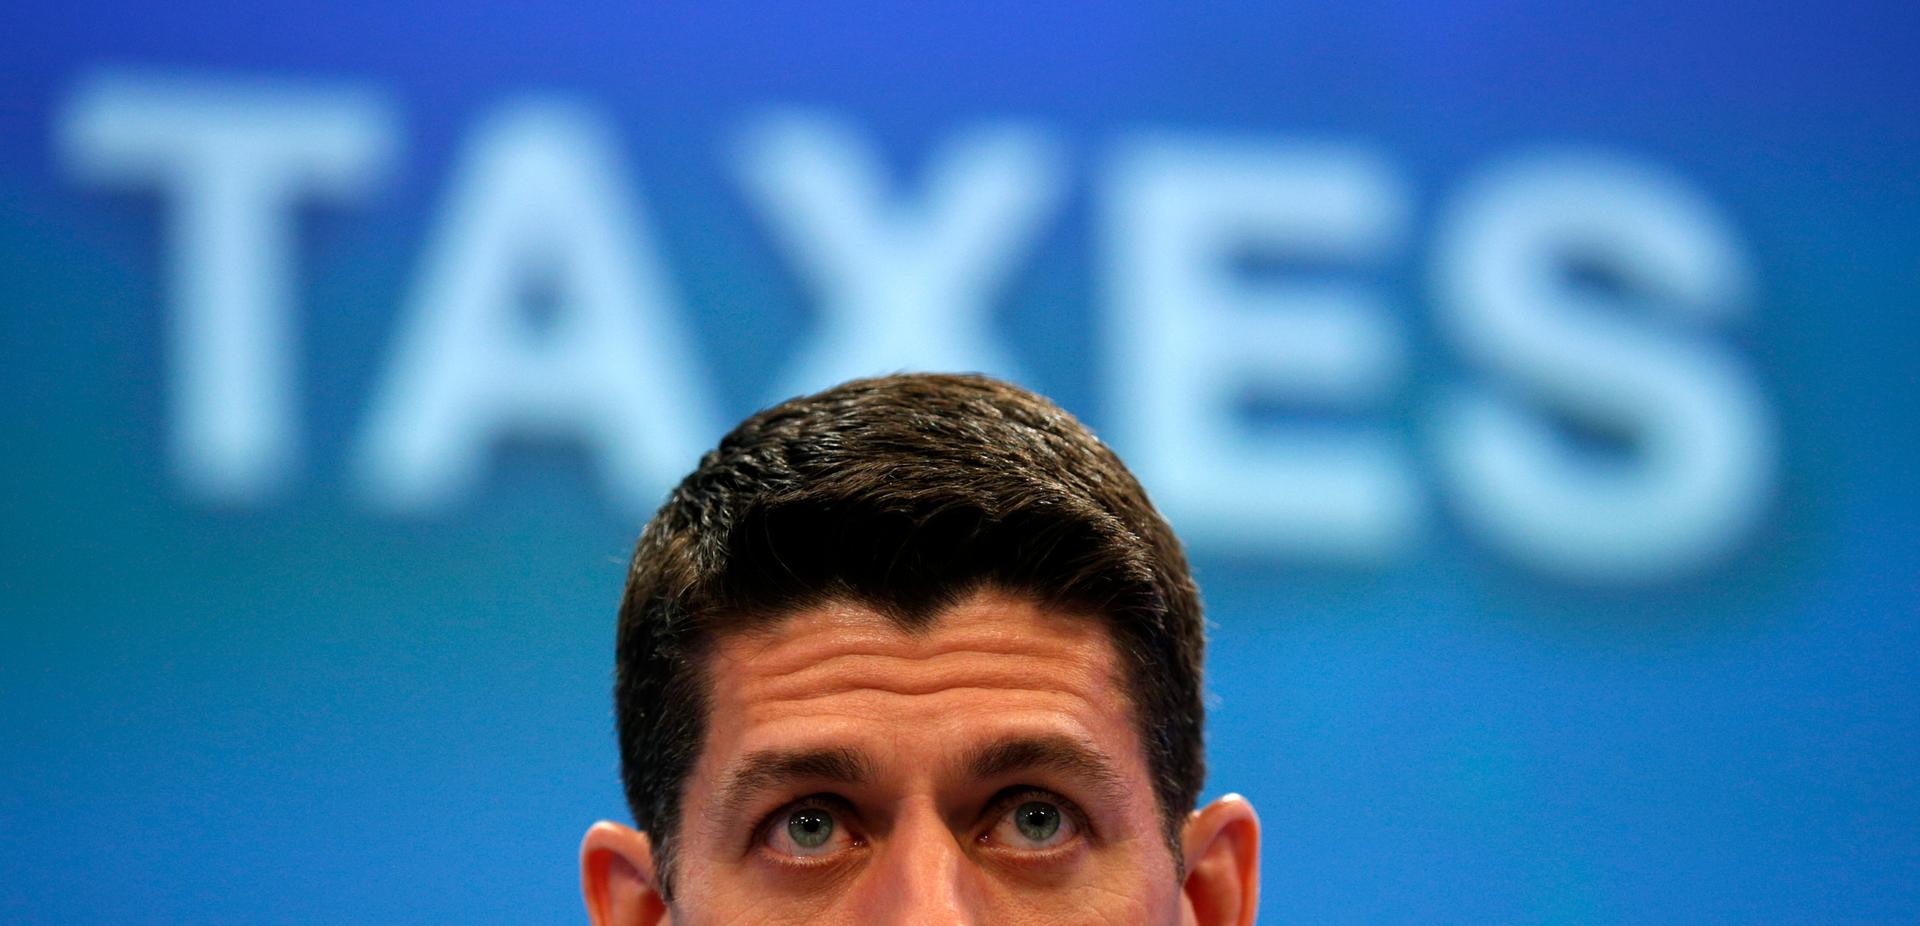 Congressman Paul Ryan takes part in a session called "The Business of Taxes" at the Wall Street Journal's CEO Council meeting in Washington on December 2, 2014.